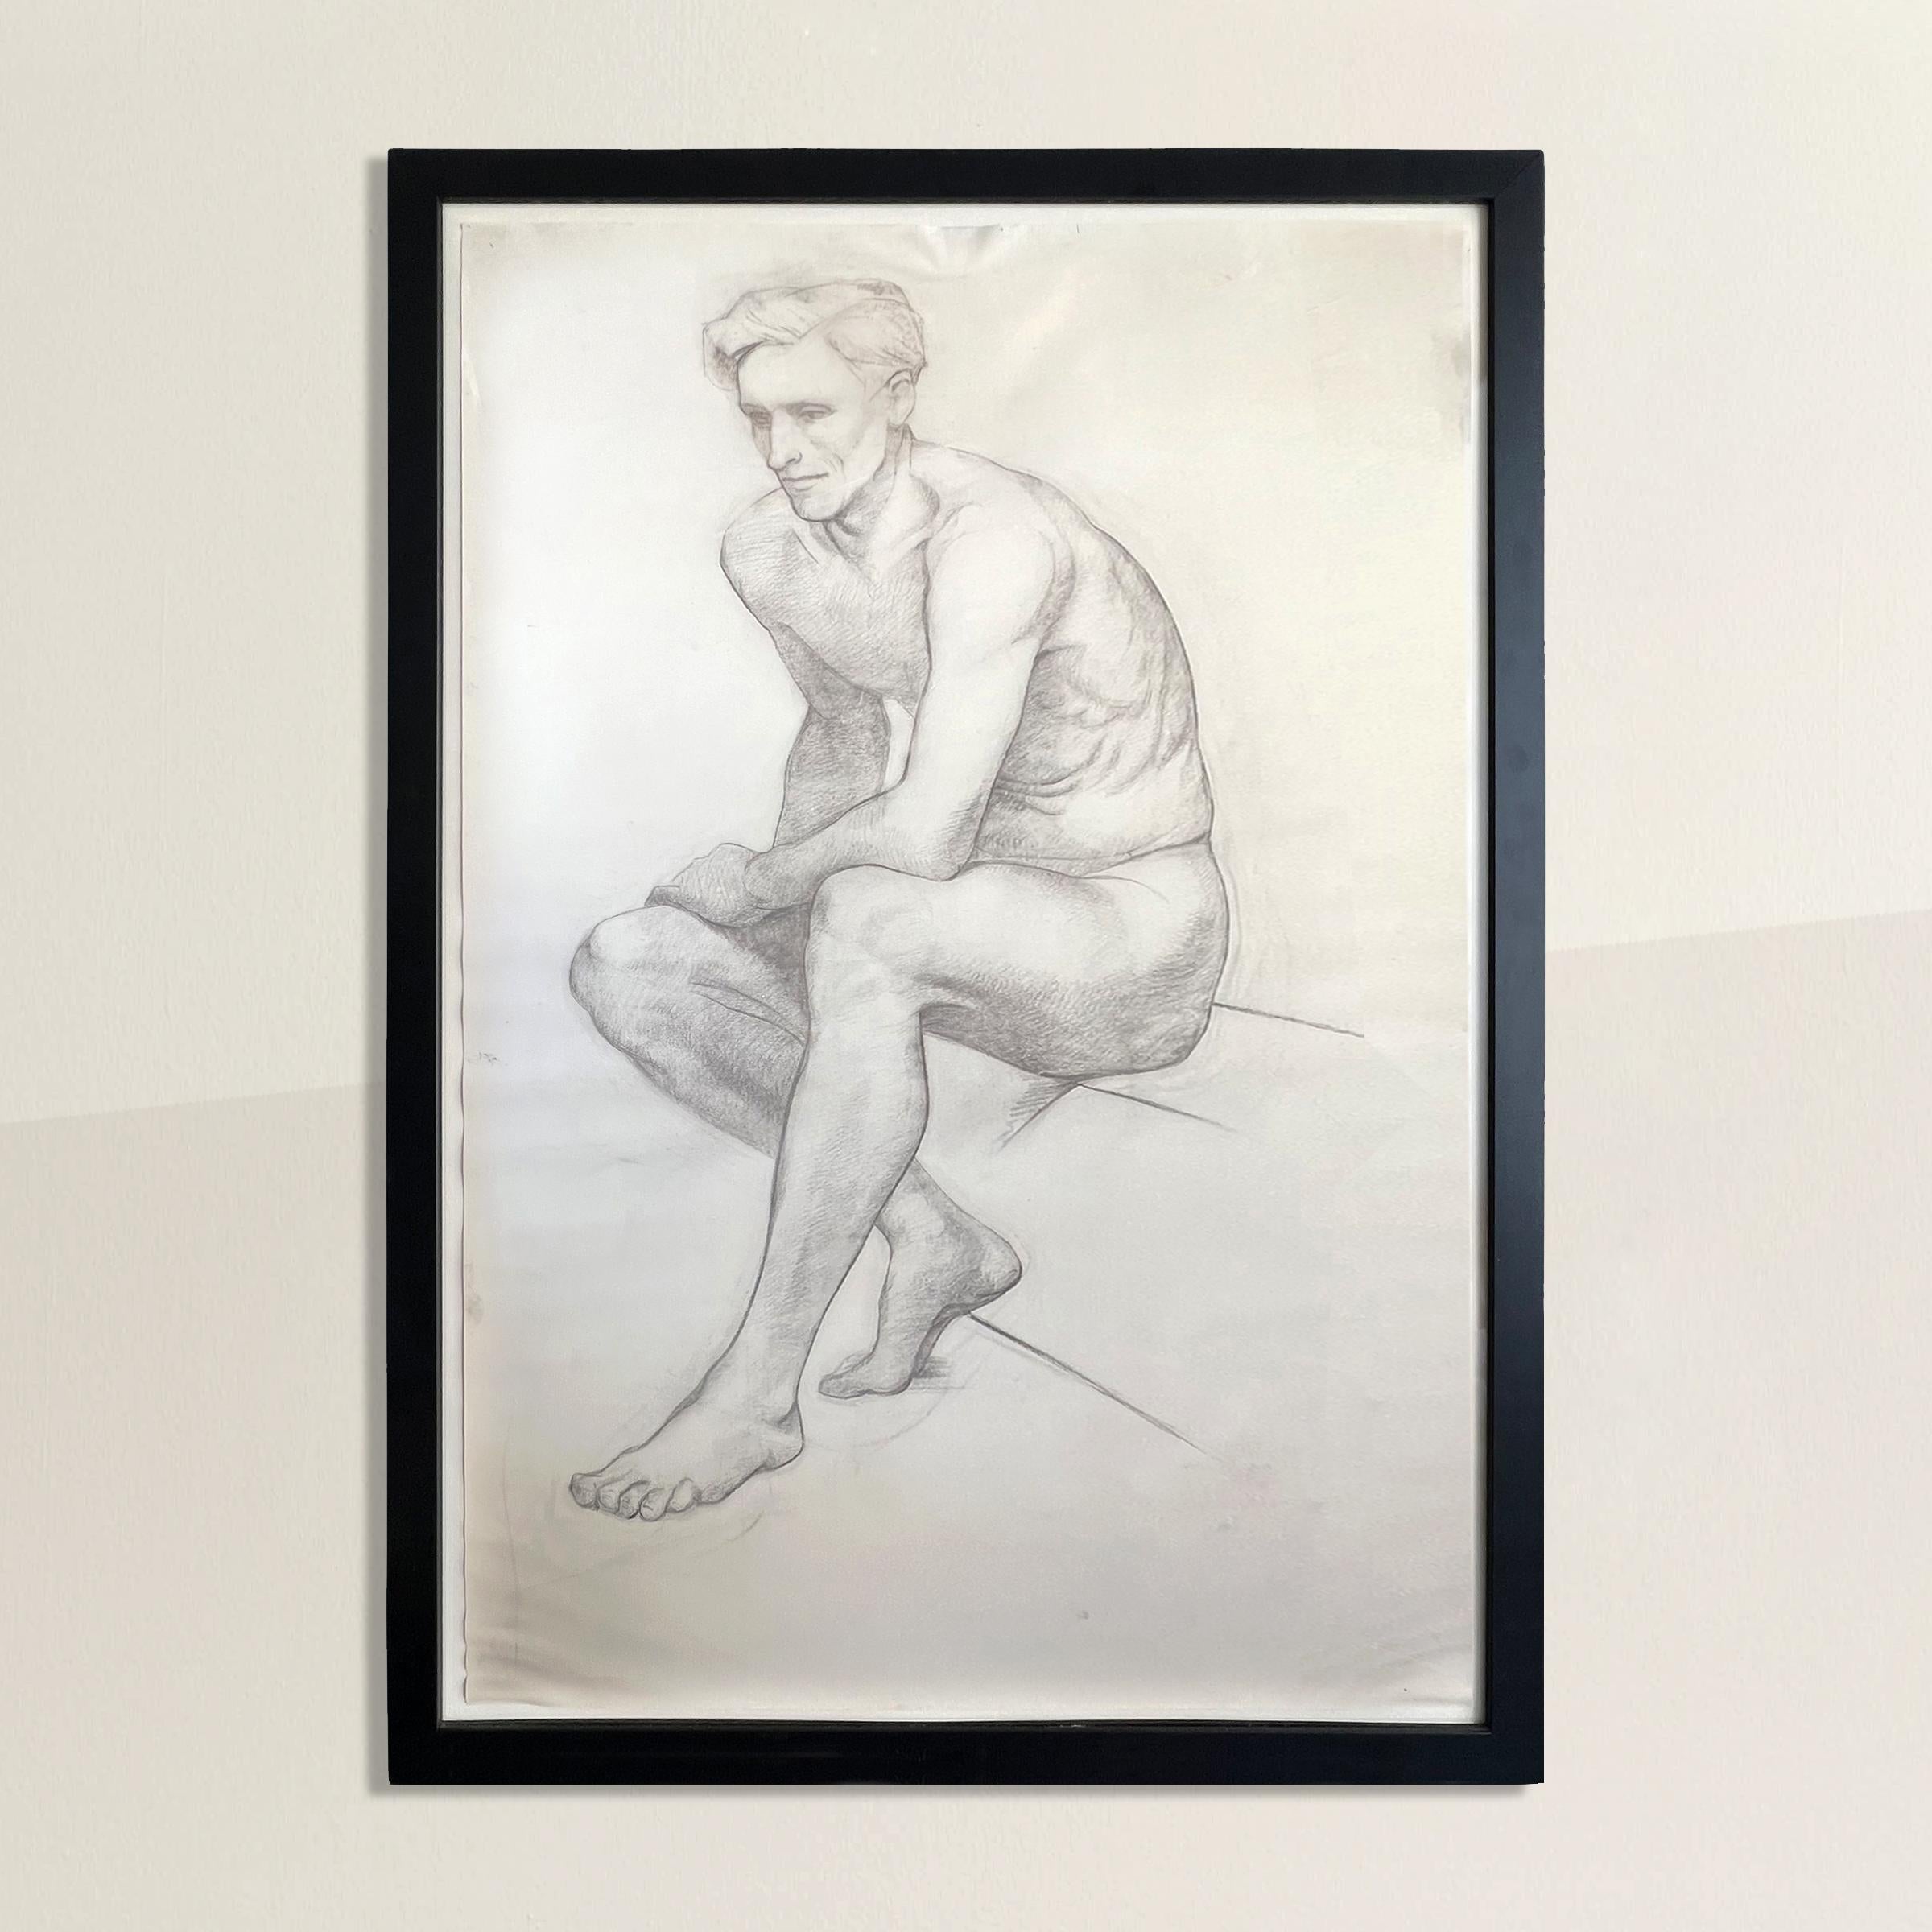 A stunning monumental mid-20th century Belgian academic figure drawing depicting a seated man with a great head of hair, and with a keen attention to musculature.